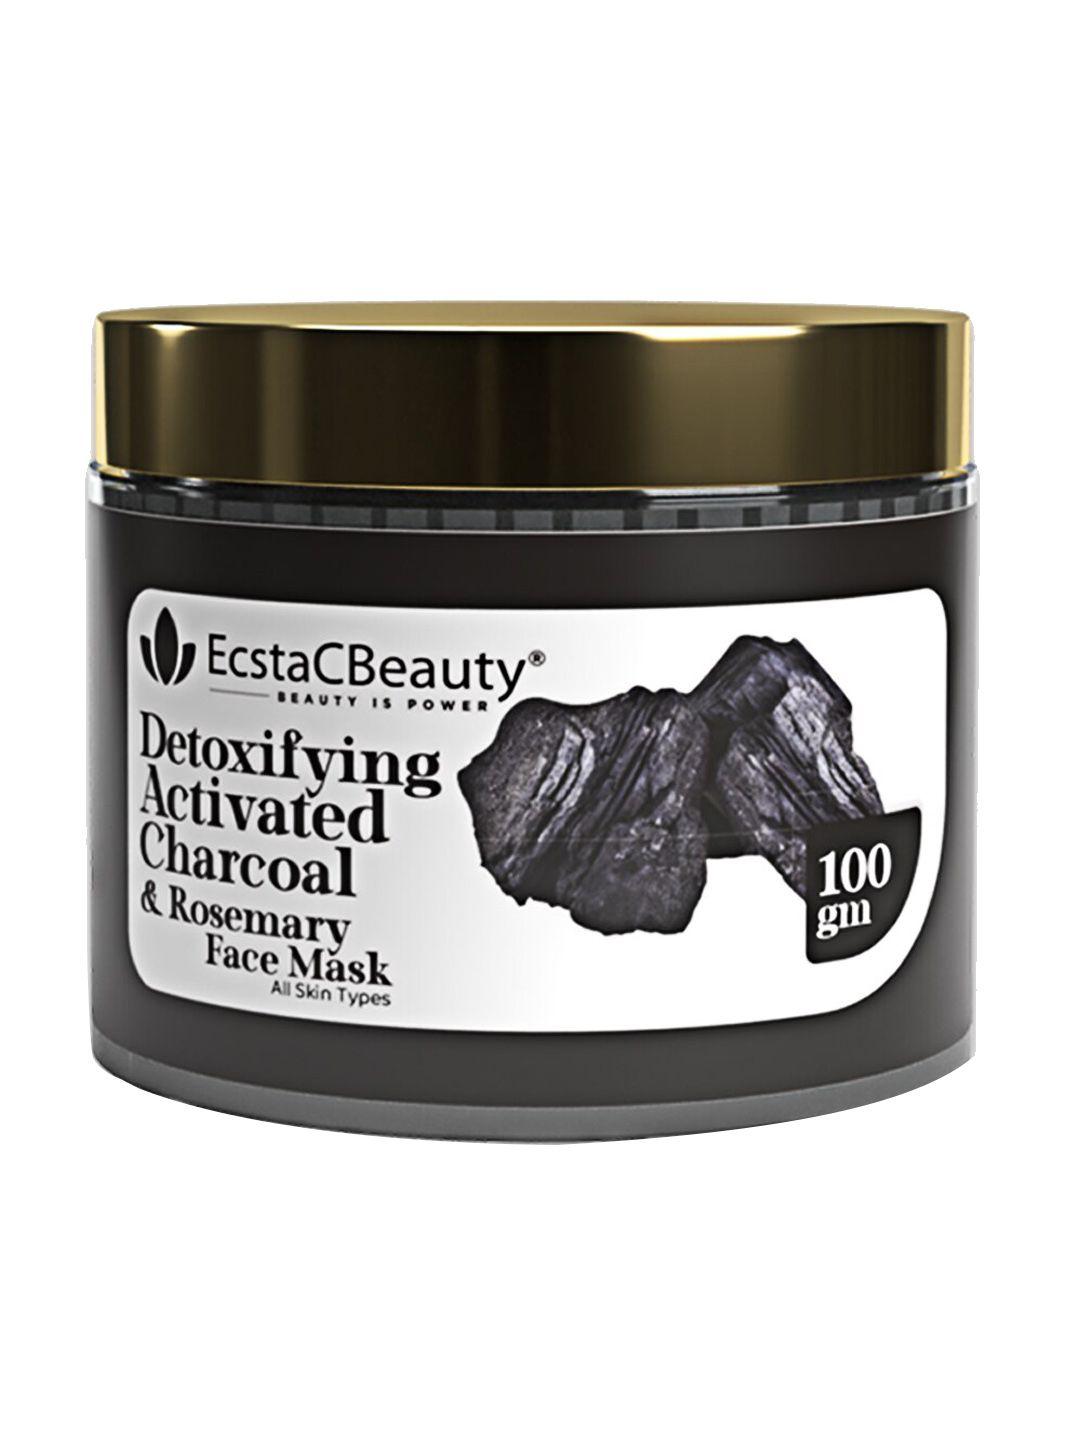 ecstacbeauty detoxifying activated charcoal & rosemary facial mask - 100g